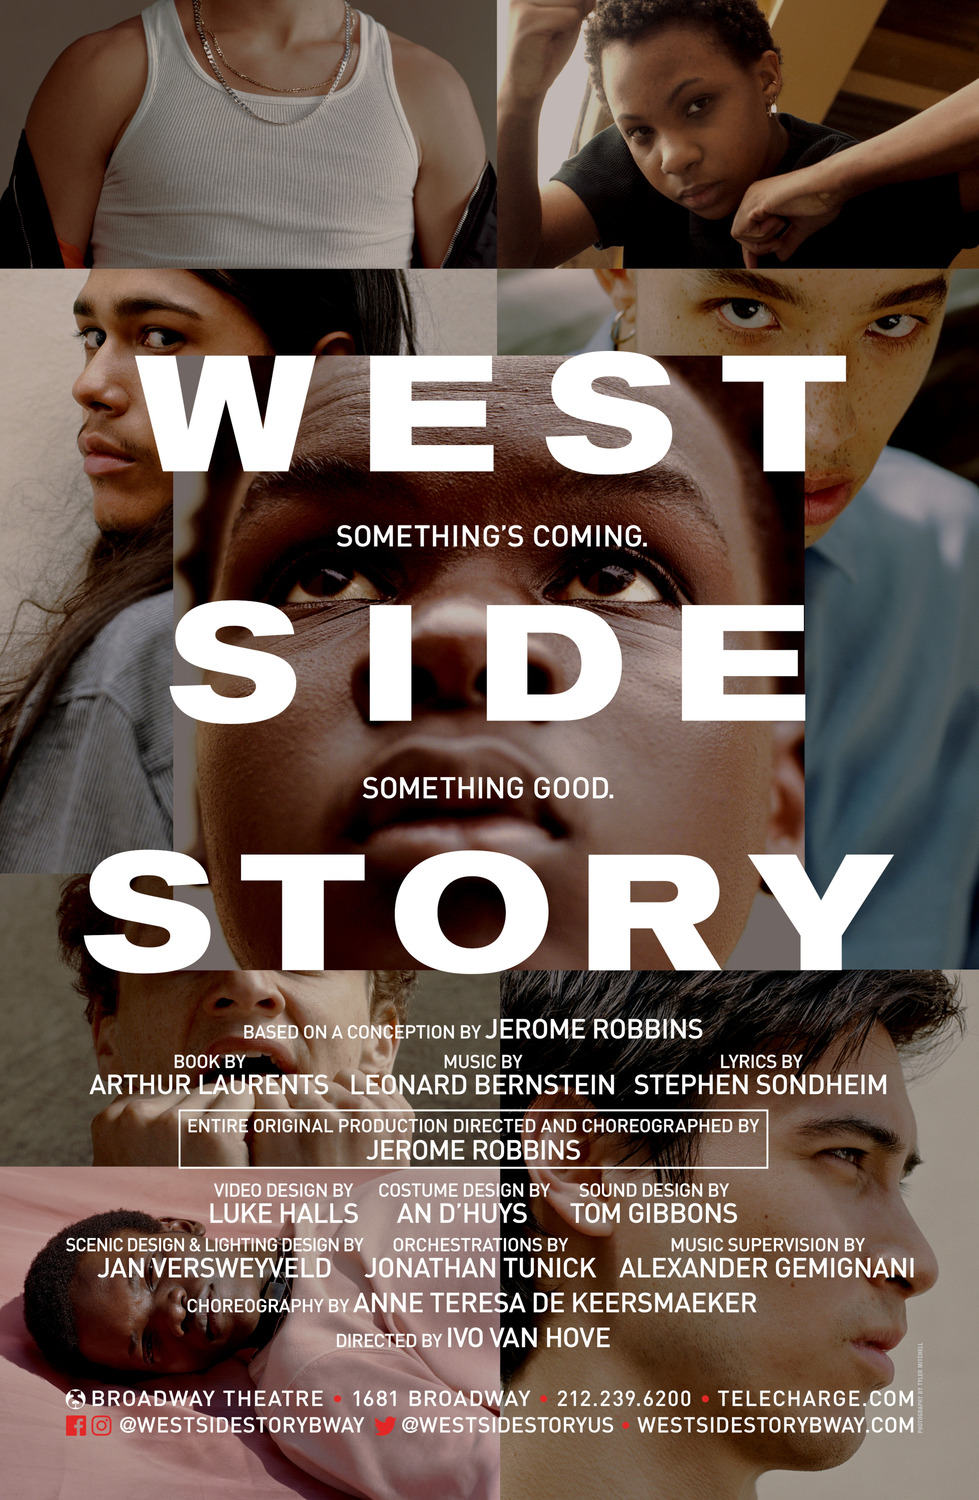 Extra Large Broadway Poster Image for West Side Story 